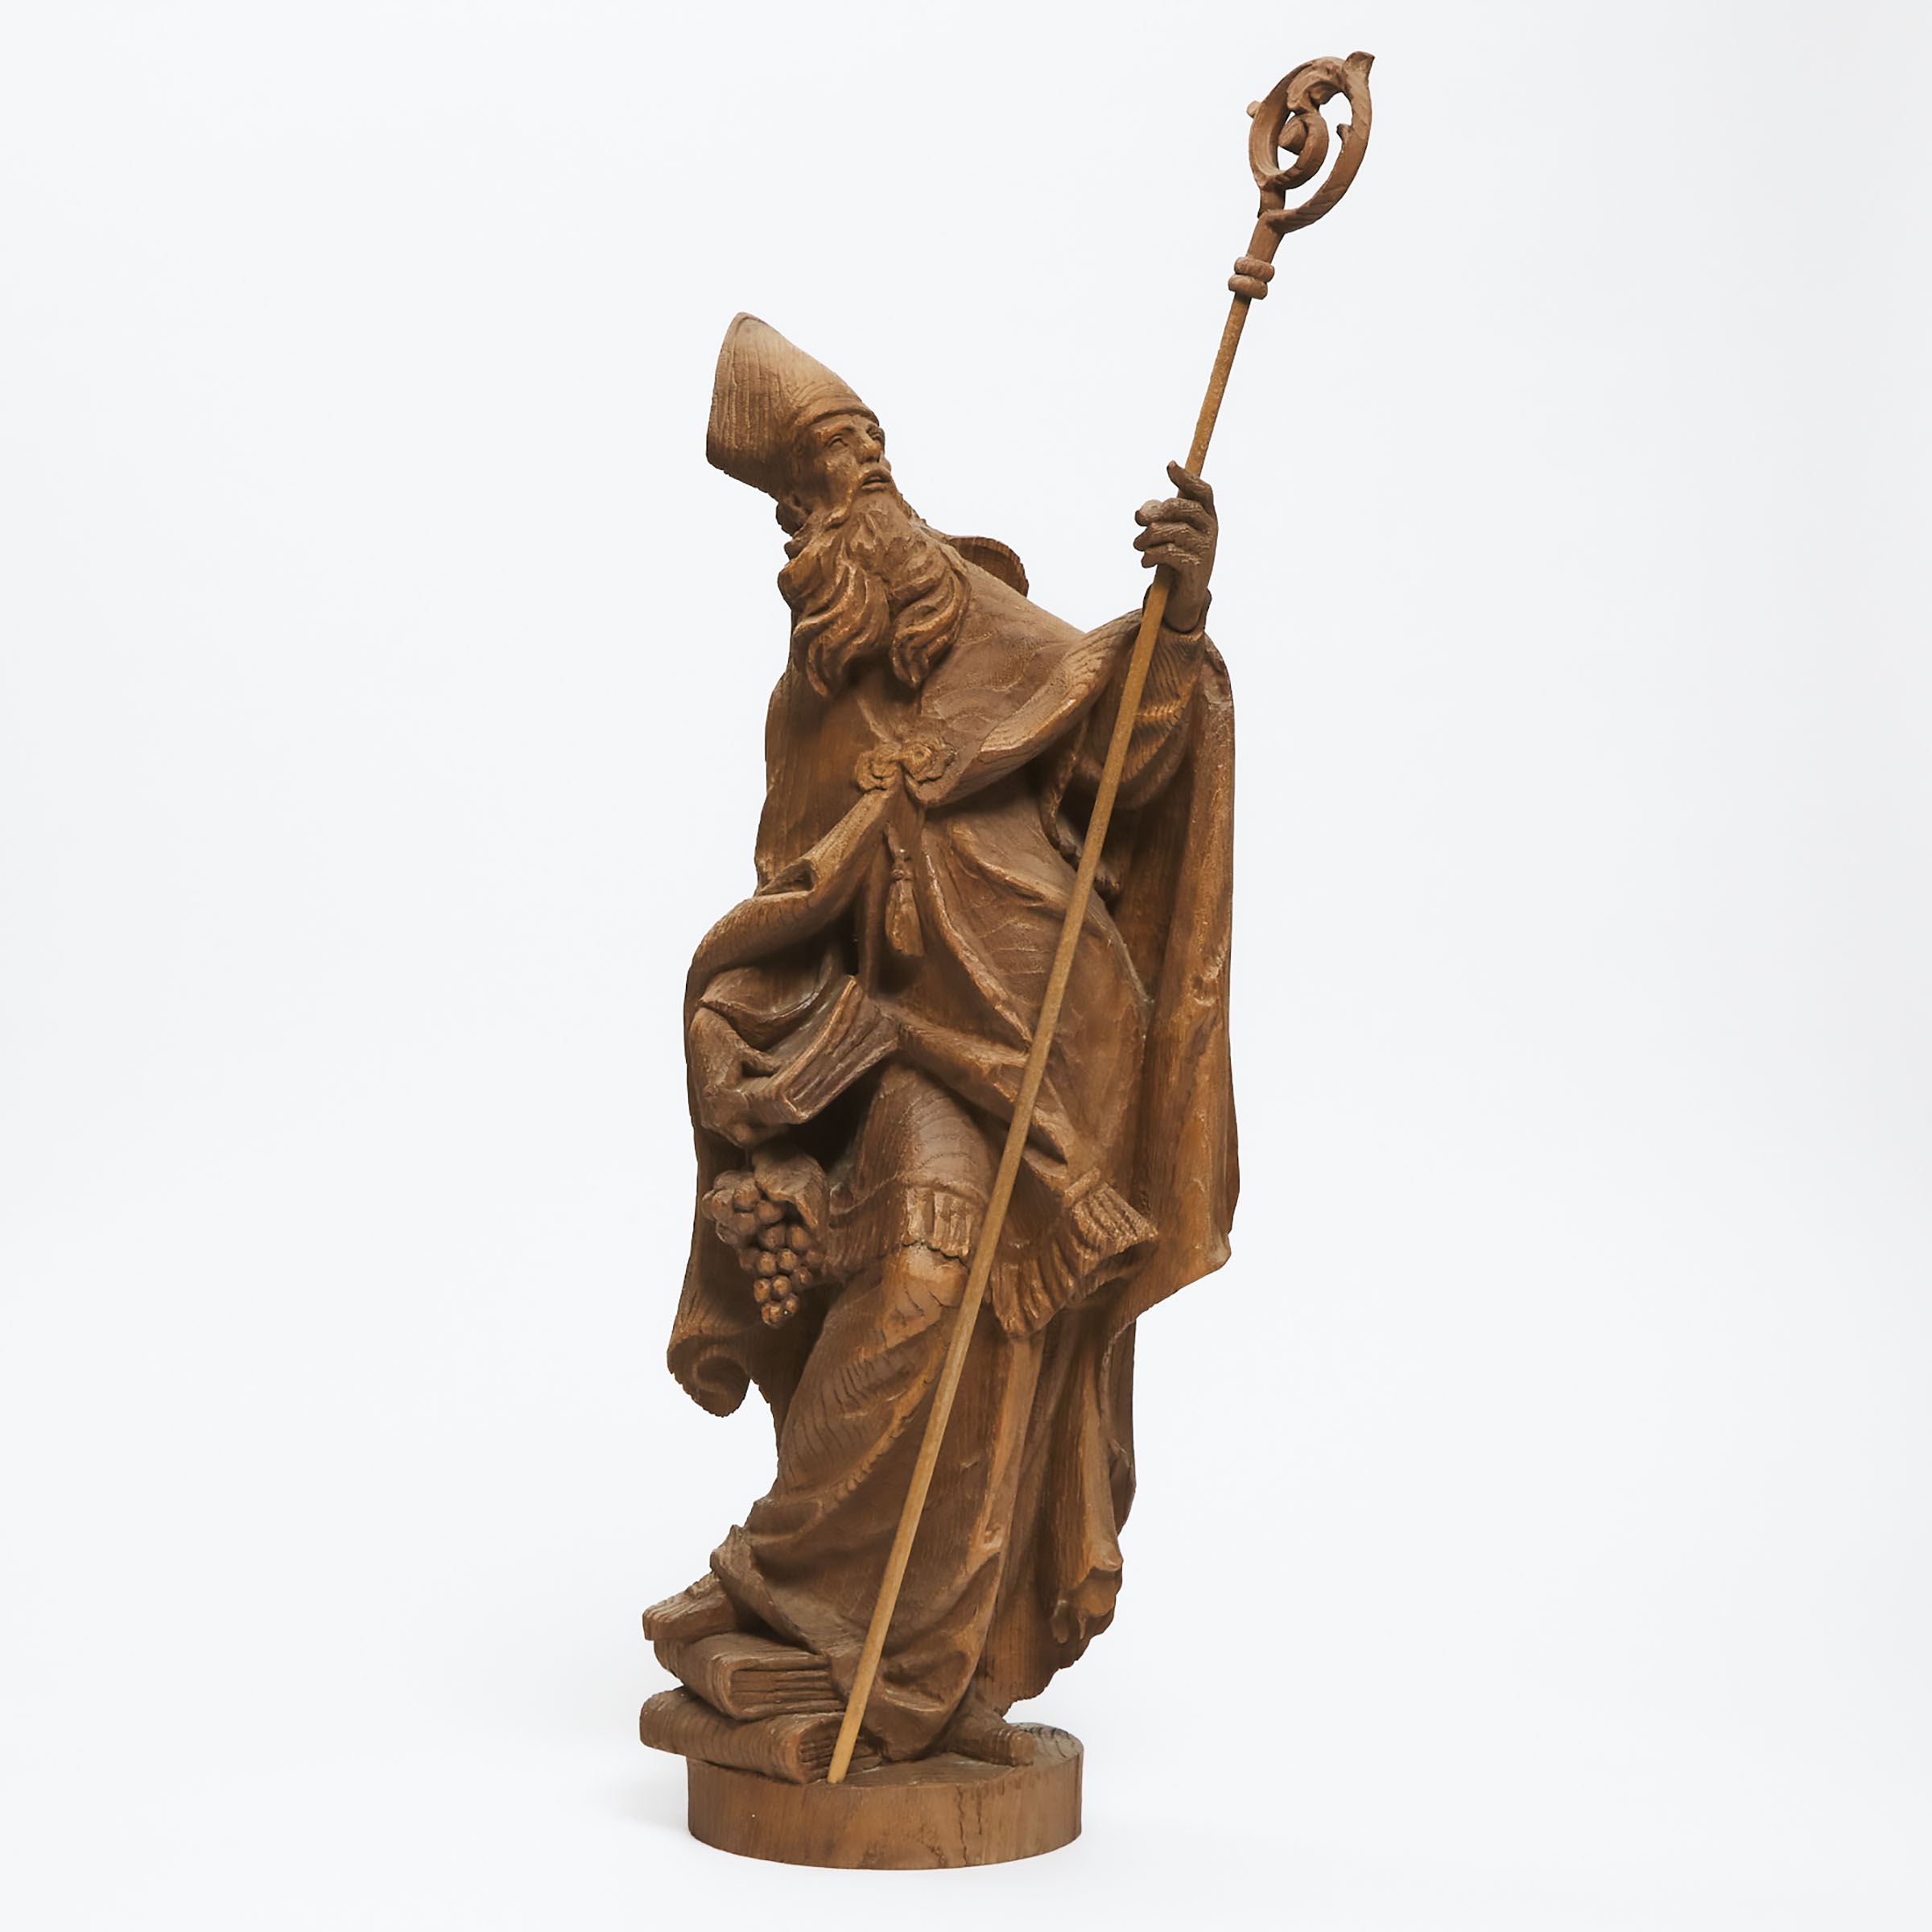 Gothic Style Carved Oak Figure of a Bishop with Crozier, Books and Grapes, Josef 'Peppi' Rifesser (Italian, 1921-2020), mid 20th century